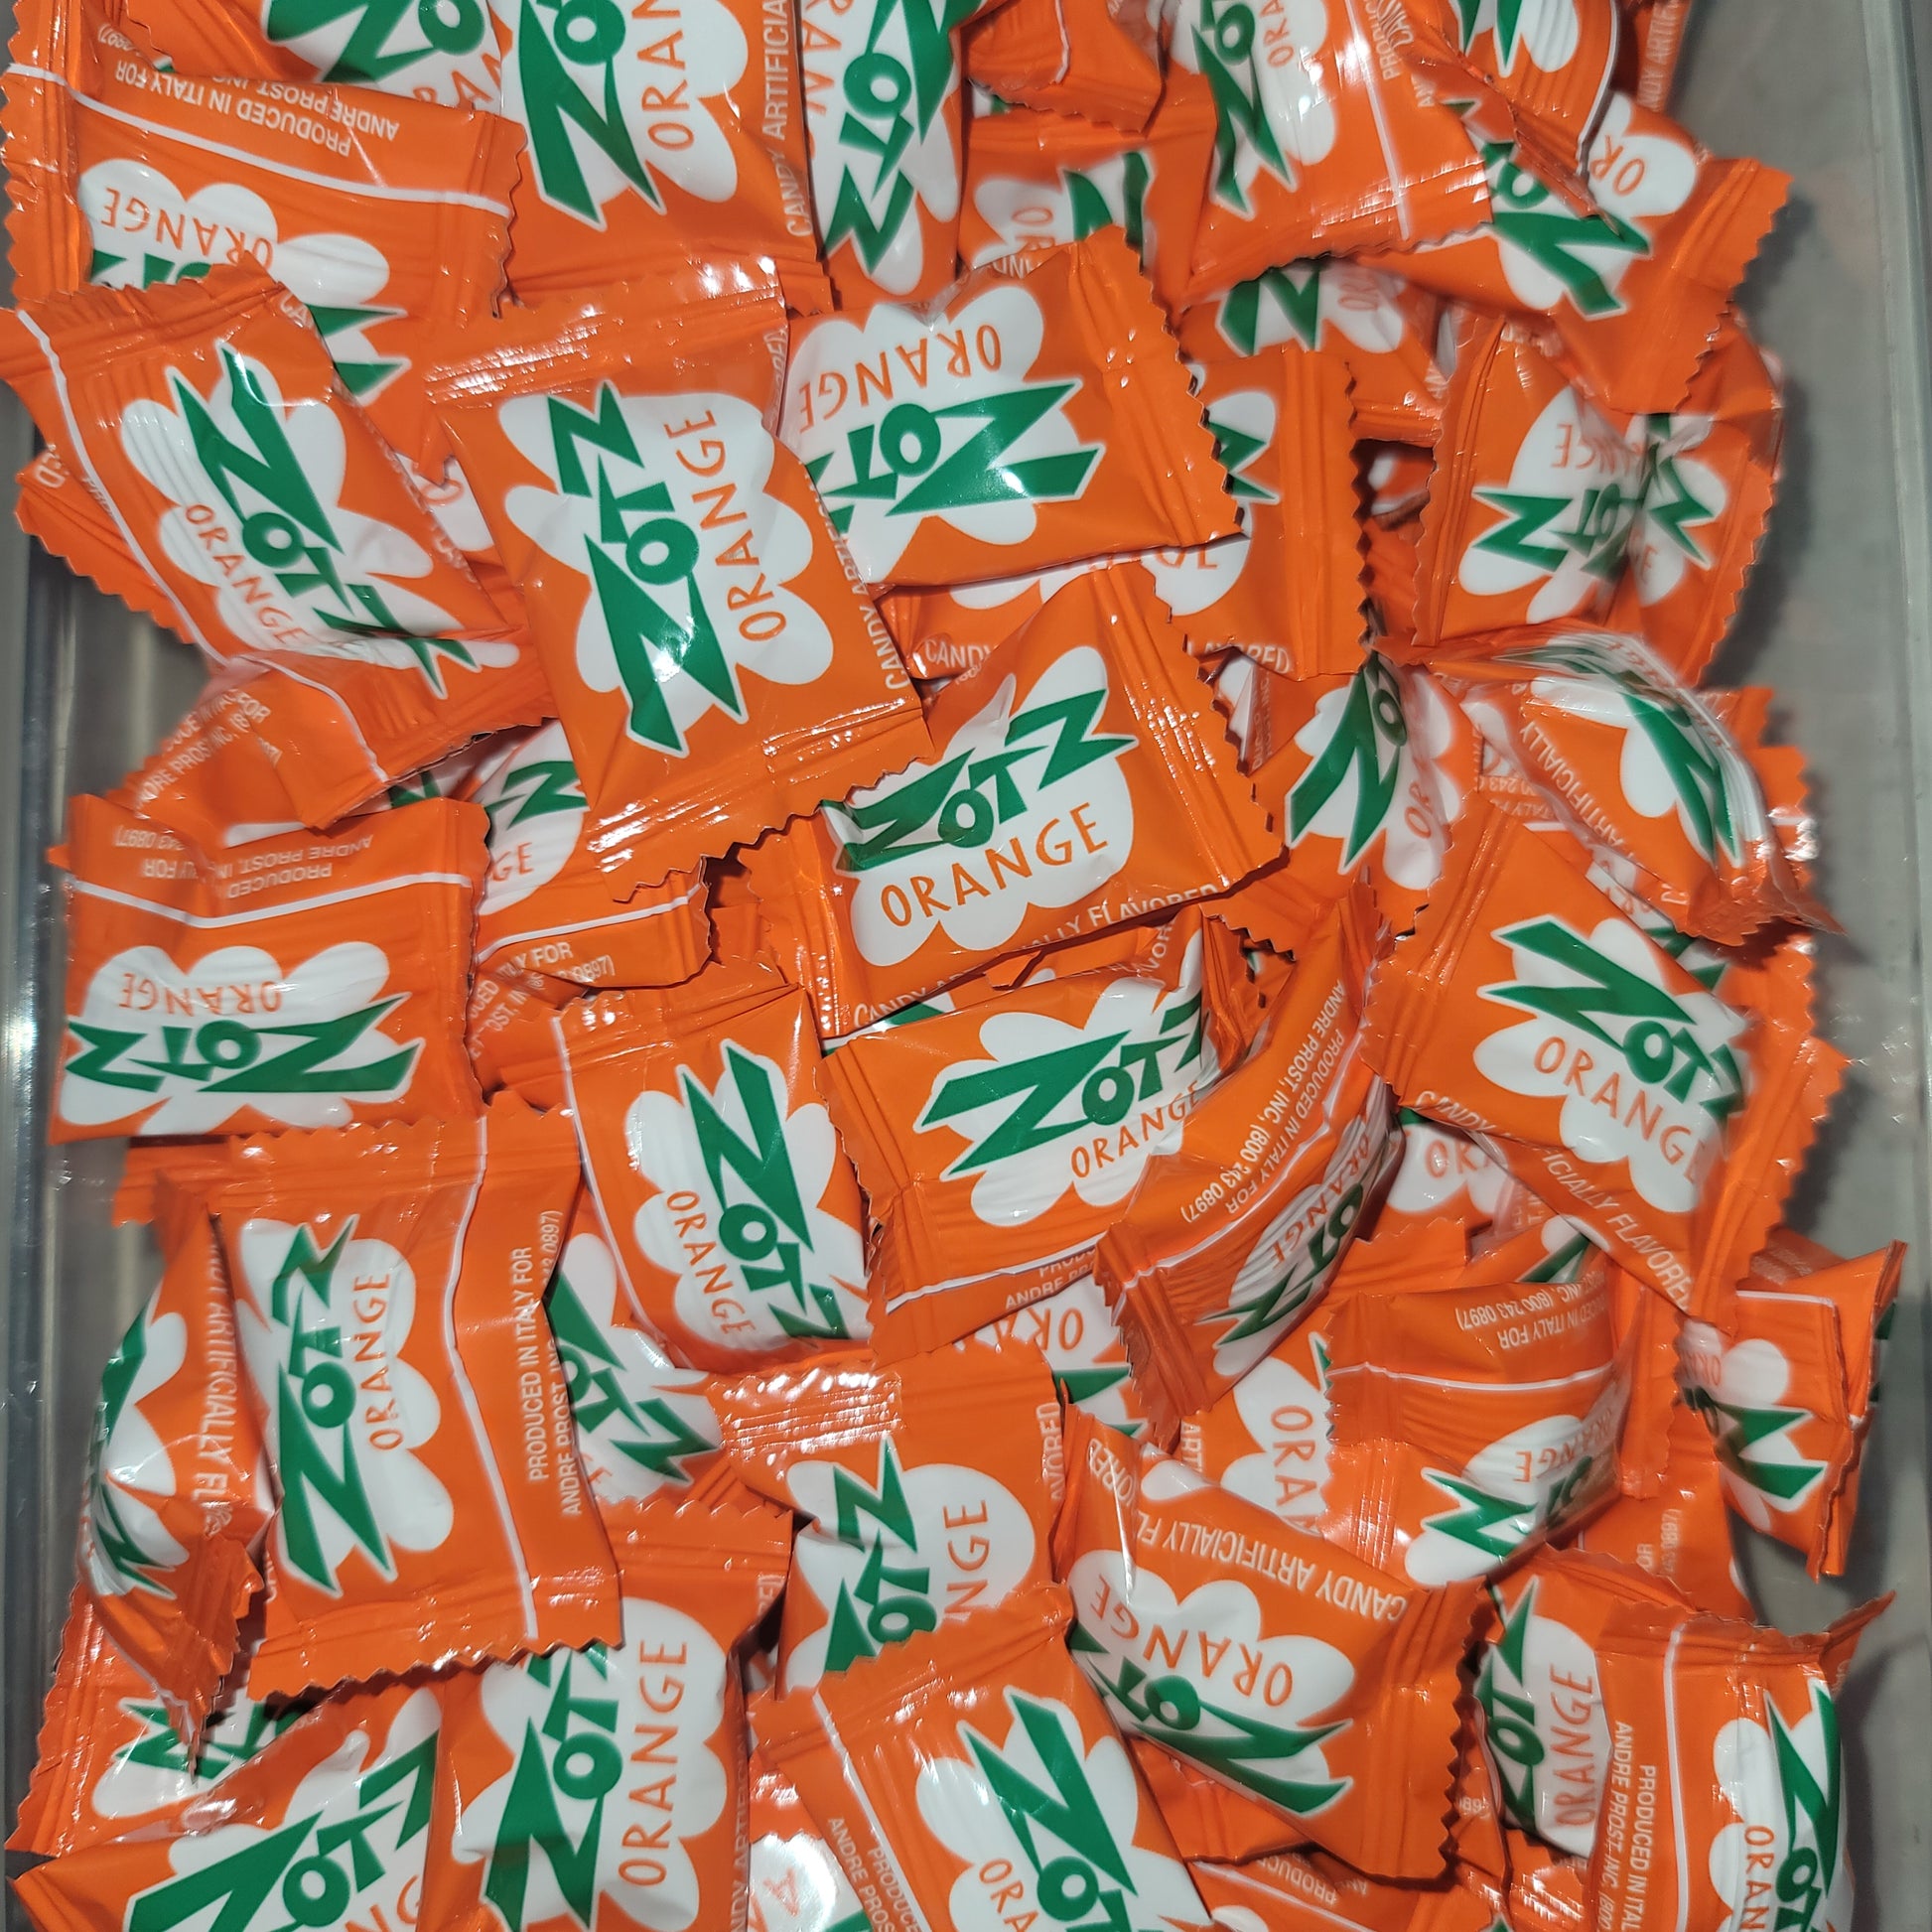 Bag of 20 Zotz Individual Wrapped Candy